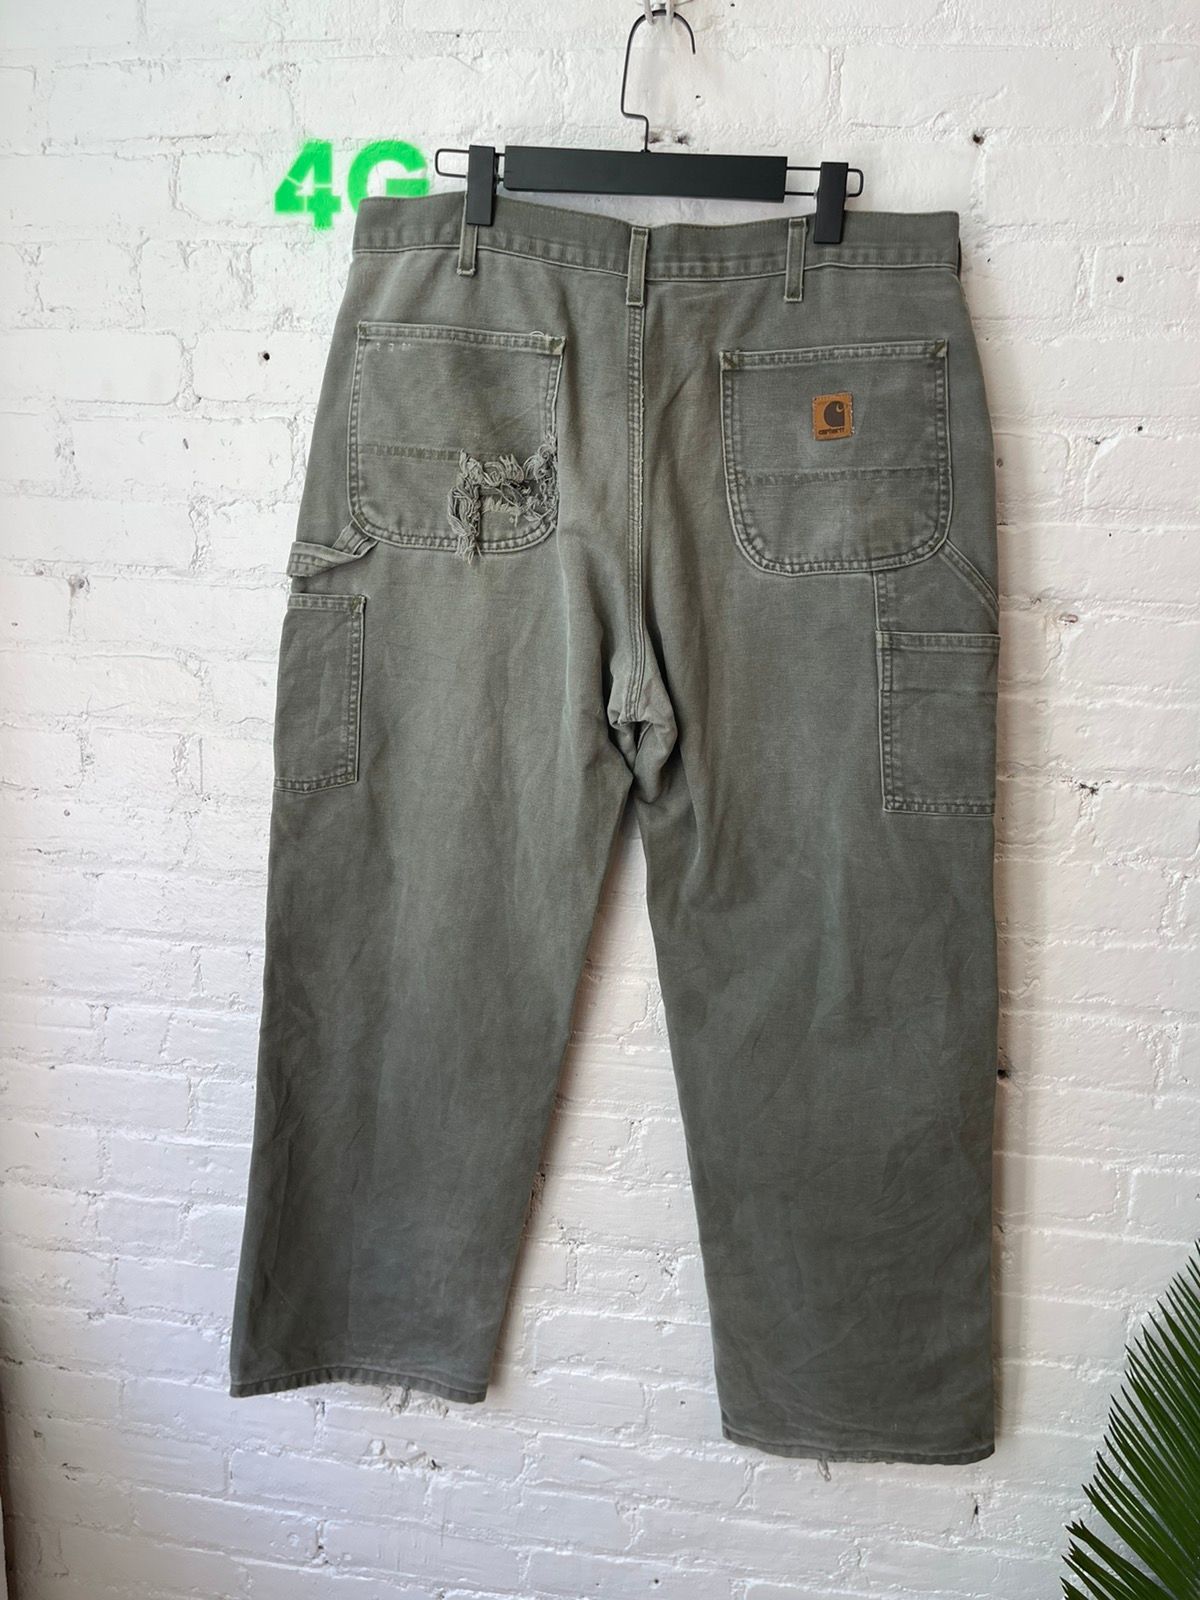 Vintage Carhartt THRASHED Faded Olive Pants Jeans Baggy